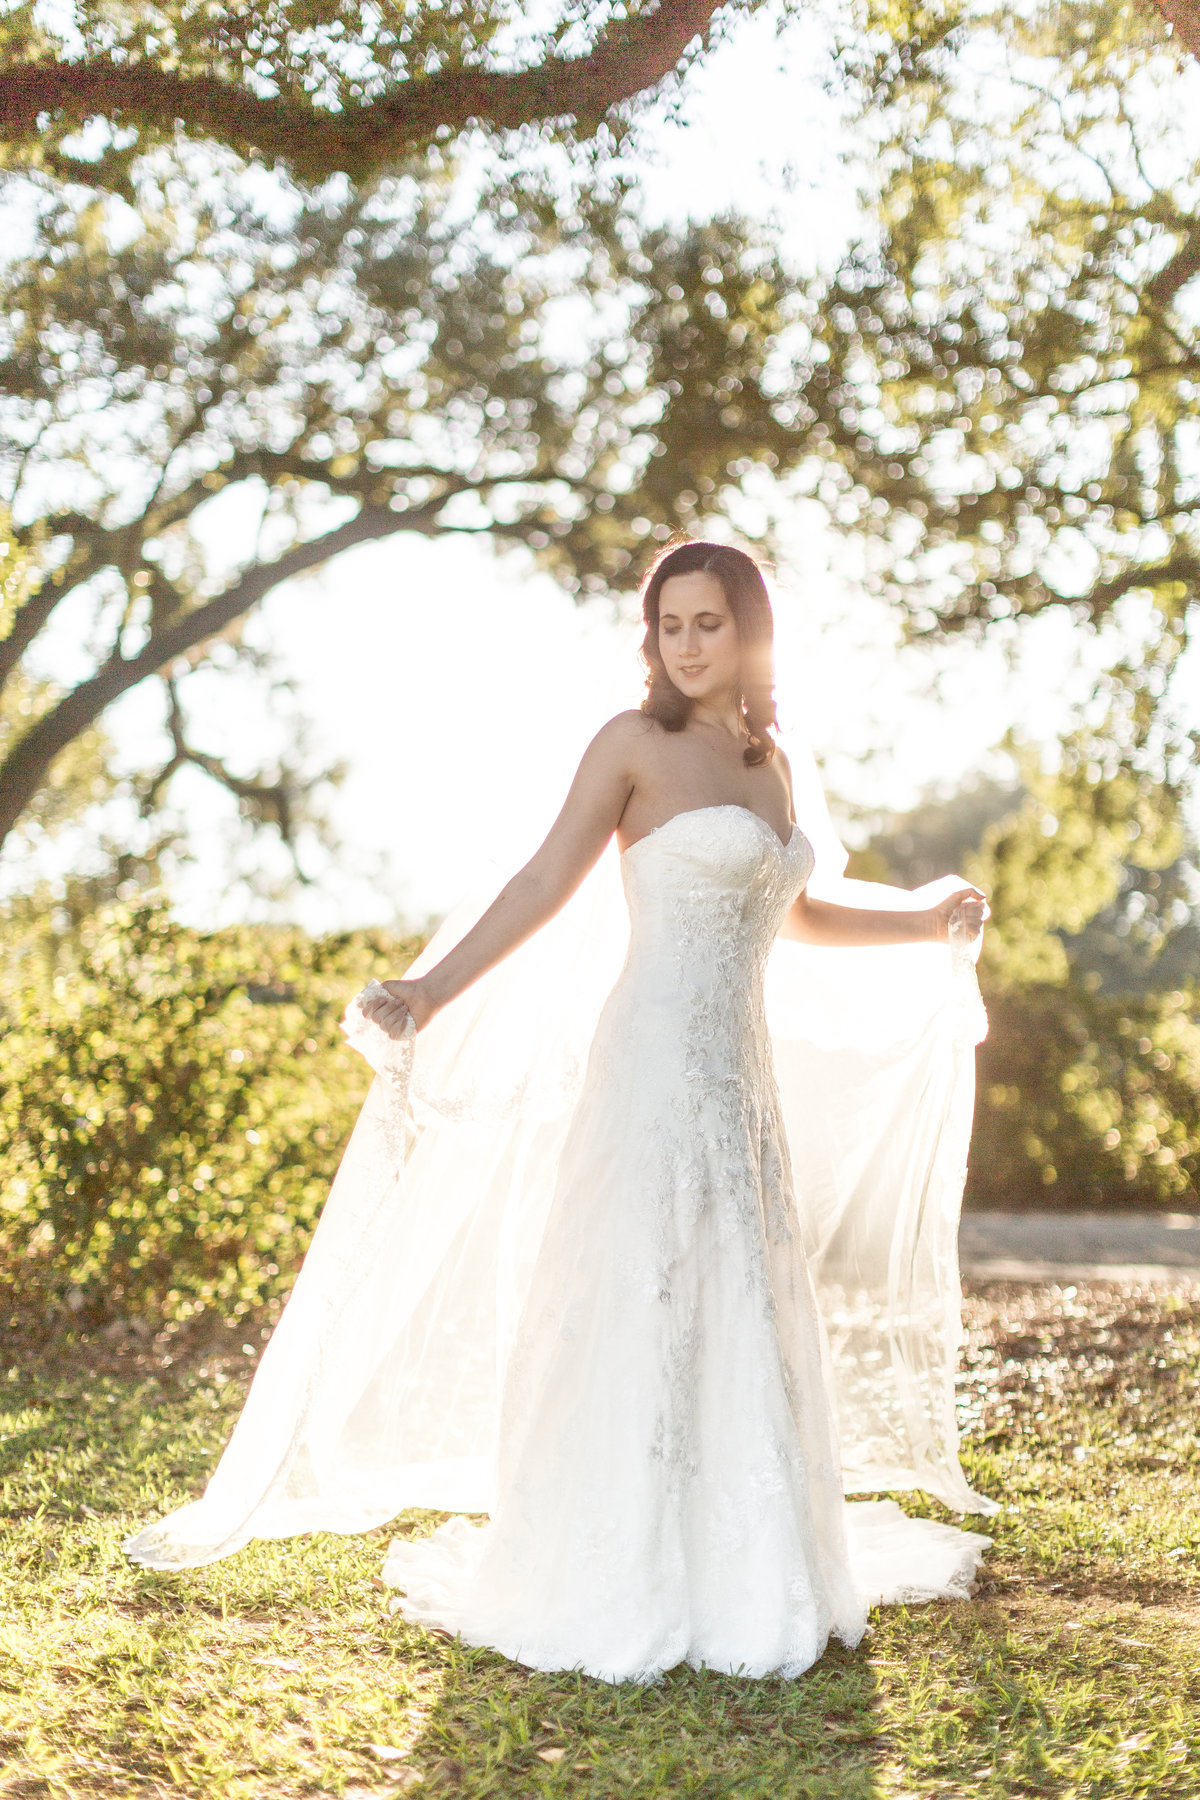 A bride shows off her vail during a portrait session at Springhill College in Mobile, Alabama.